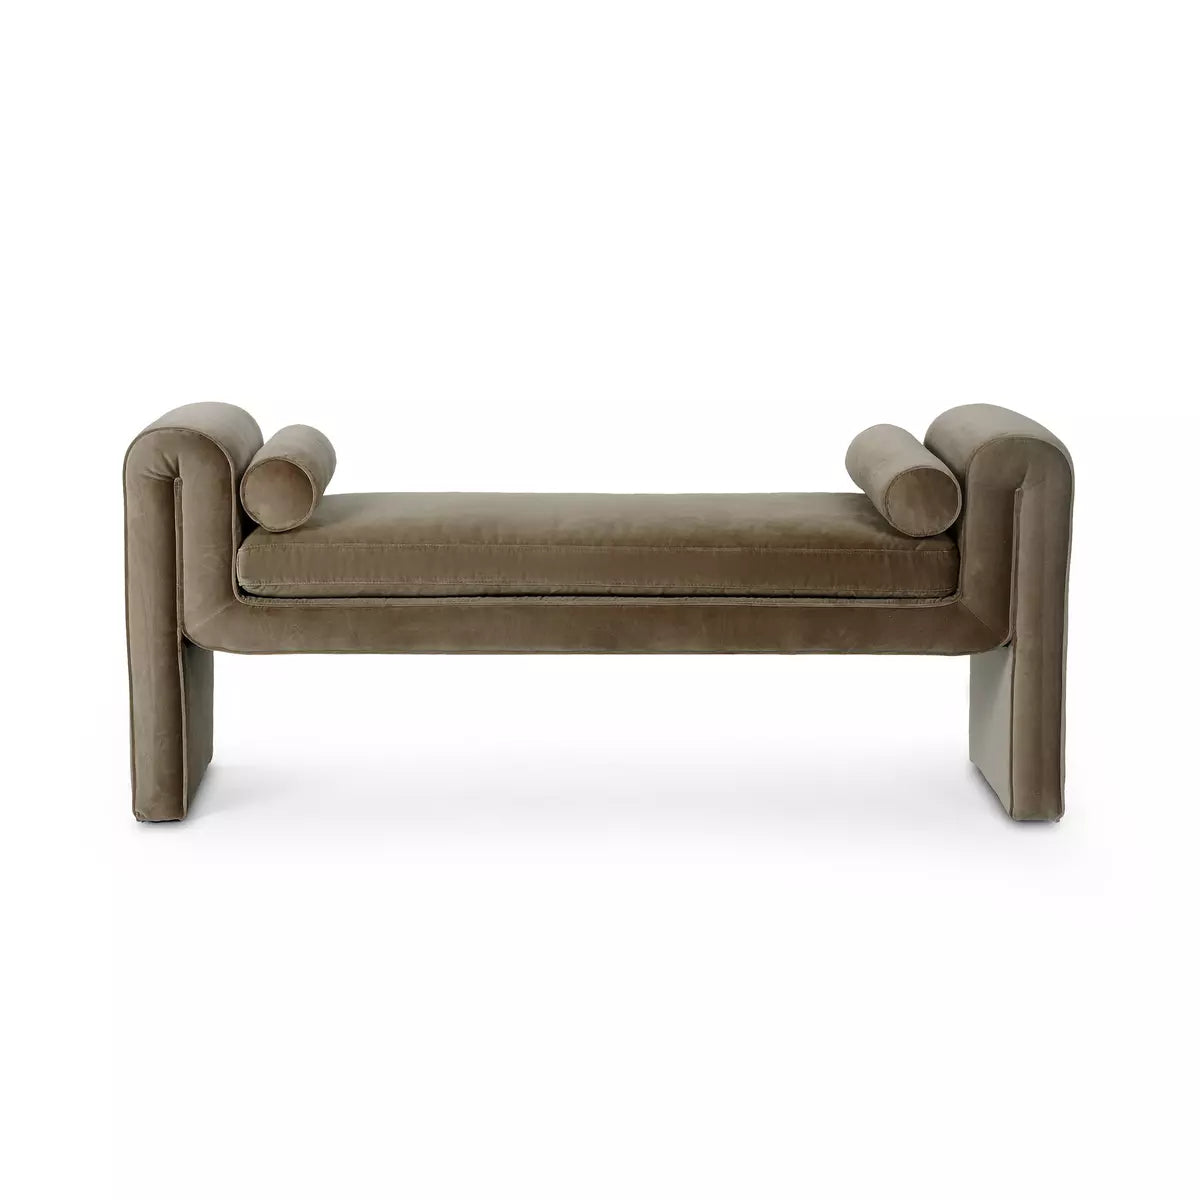 Mitchell Accent Bench Surrey Fossil